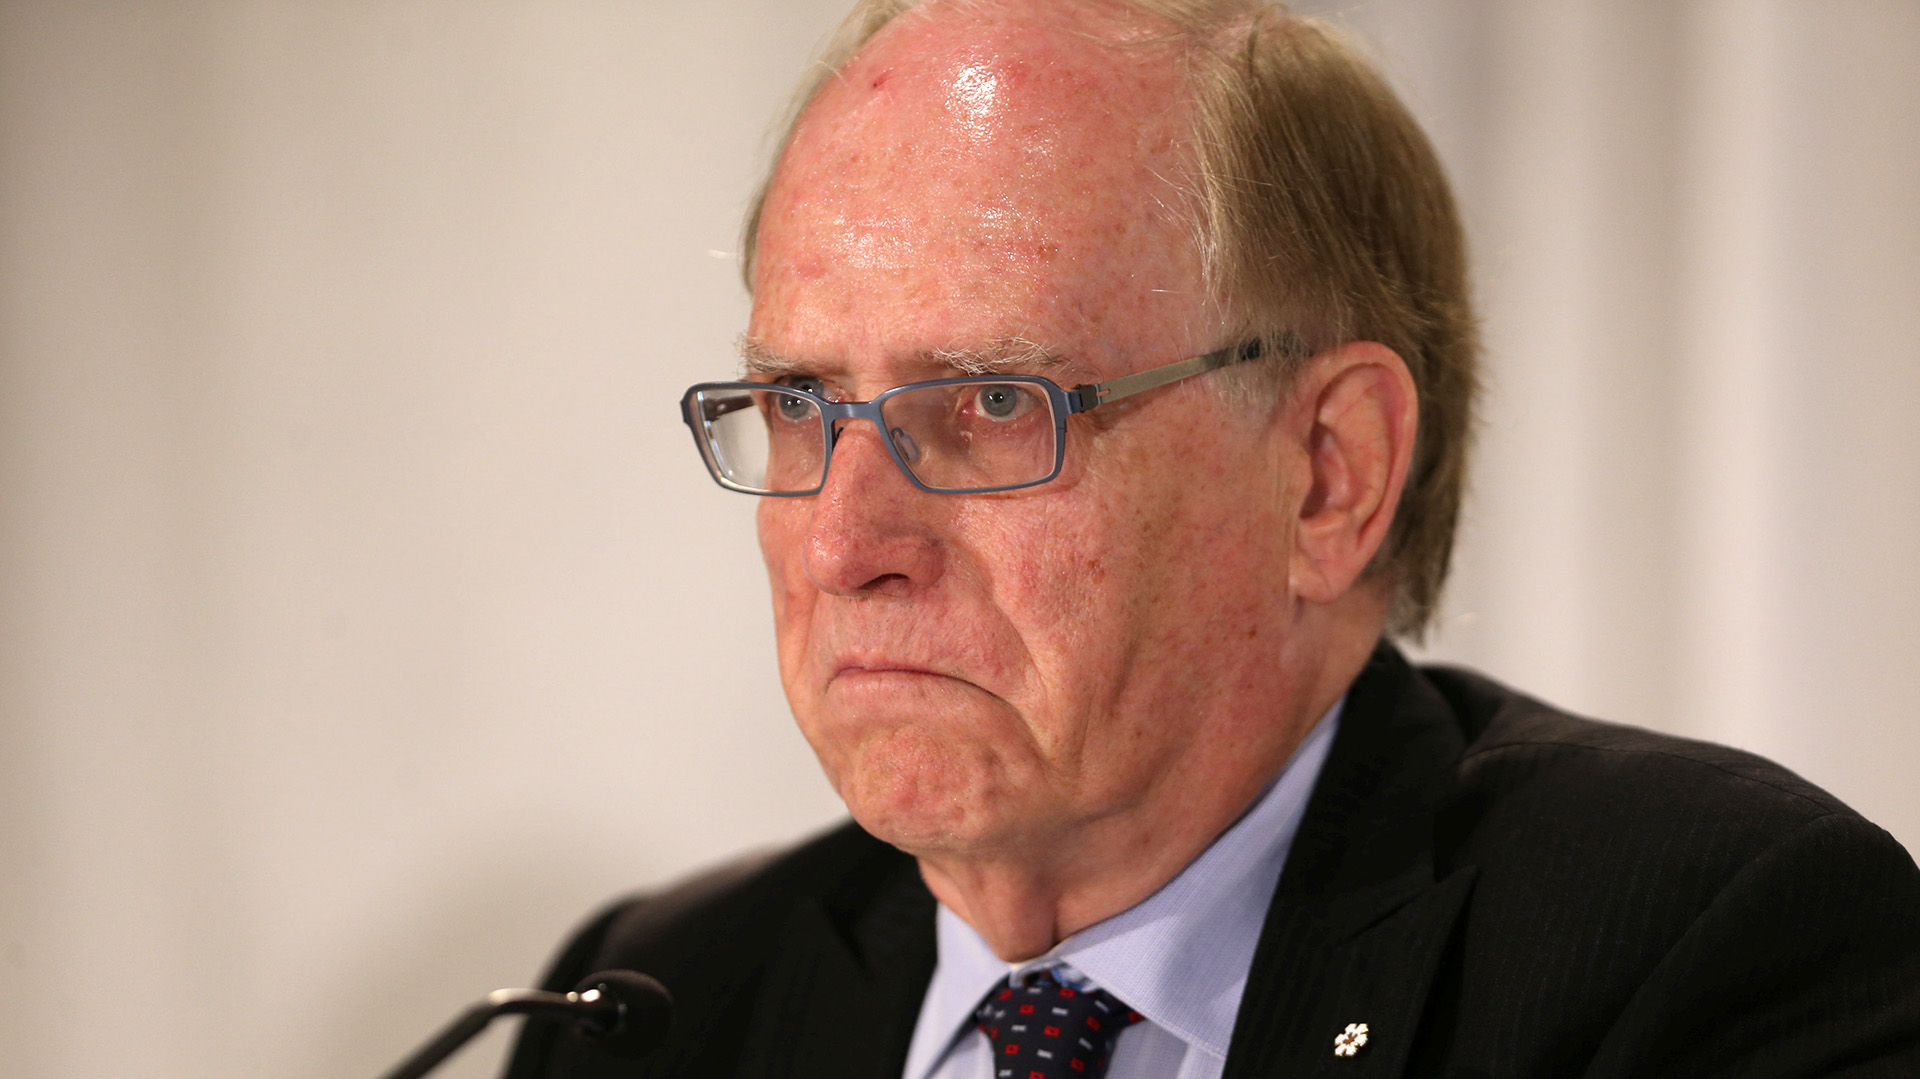 Richard McLaren, who was appointed by the World Anti-Doping Agency (WADA) to head an independent investigative team, presents his report in Toronto, Ontario, Canada July 18, 2016. REUTERS/Peter Power